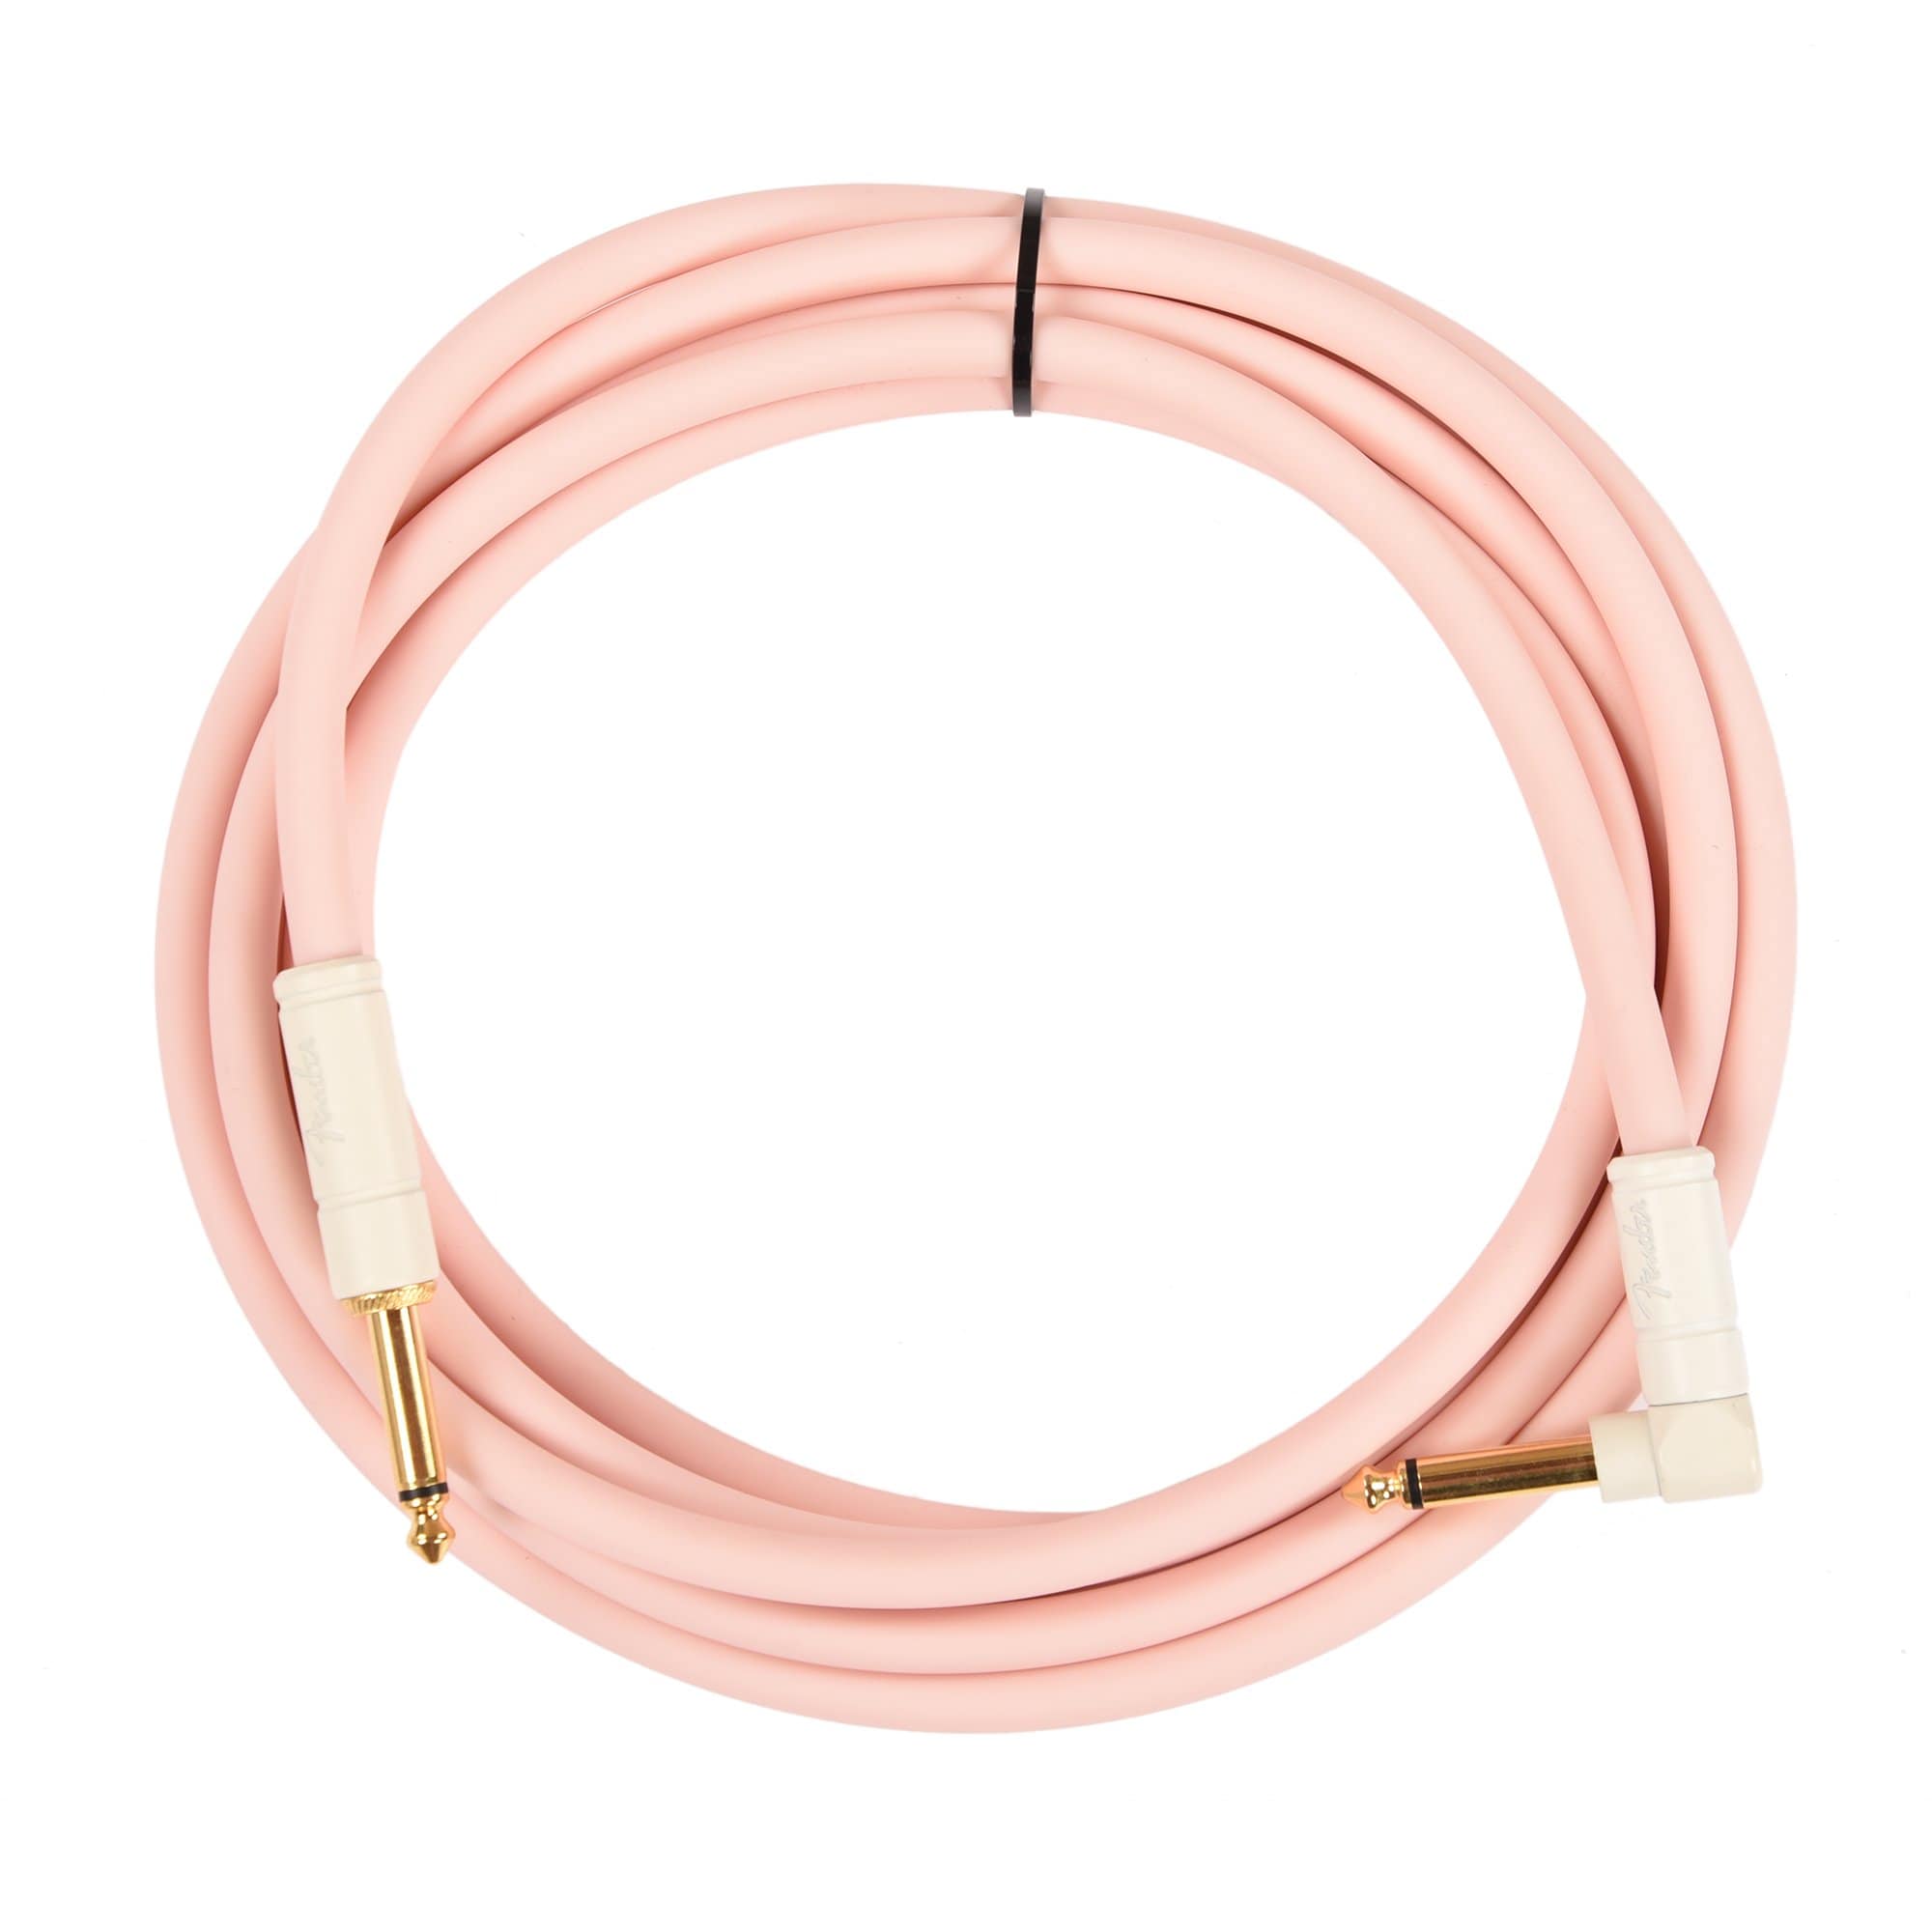 Fender Deluxe Instrument Cable Shell Pink 15' Angle-Straight